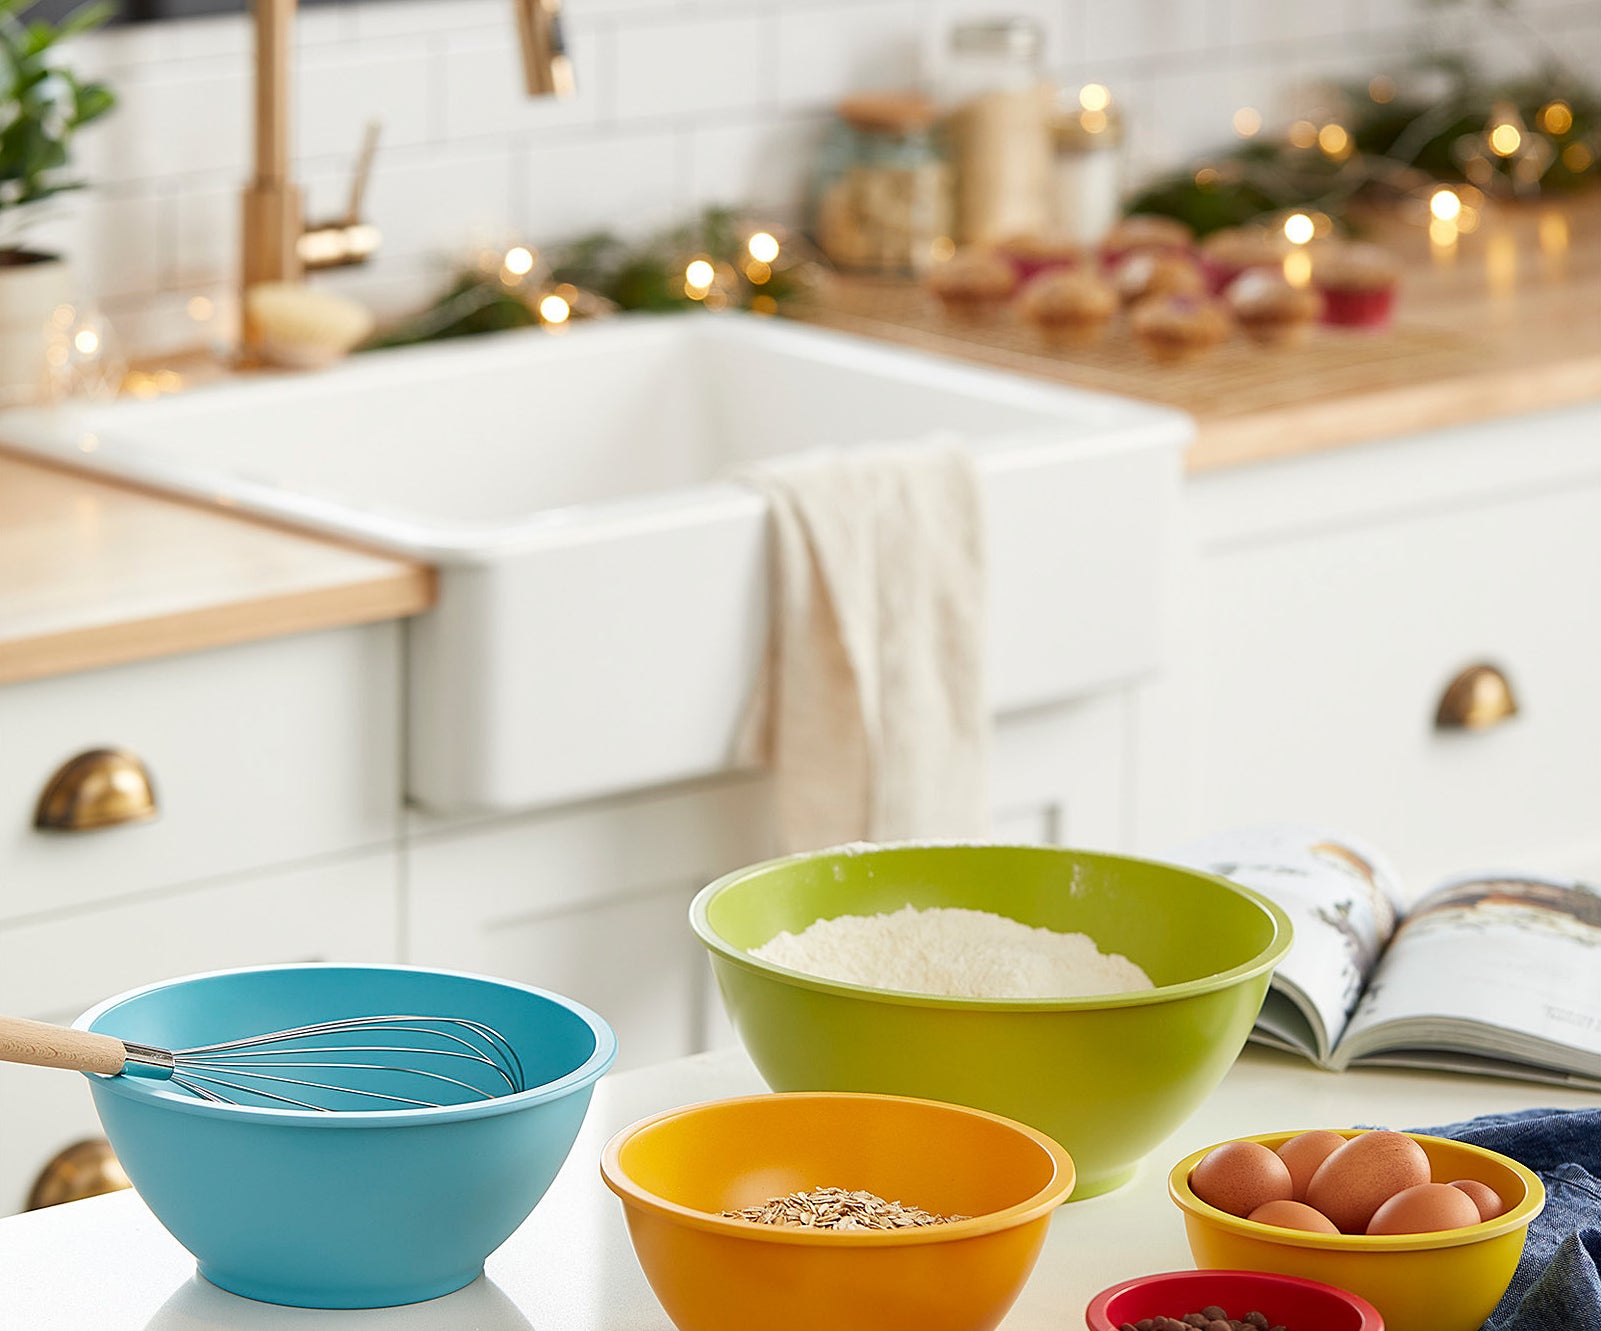 five colourful bowls with various ingredients in them on a kitchen counter